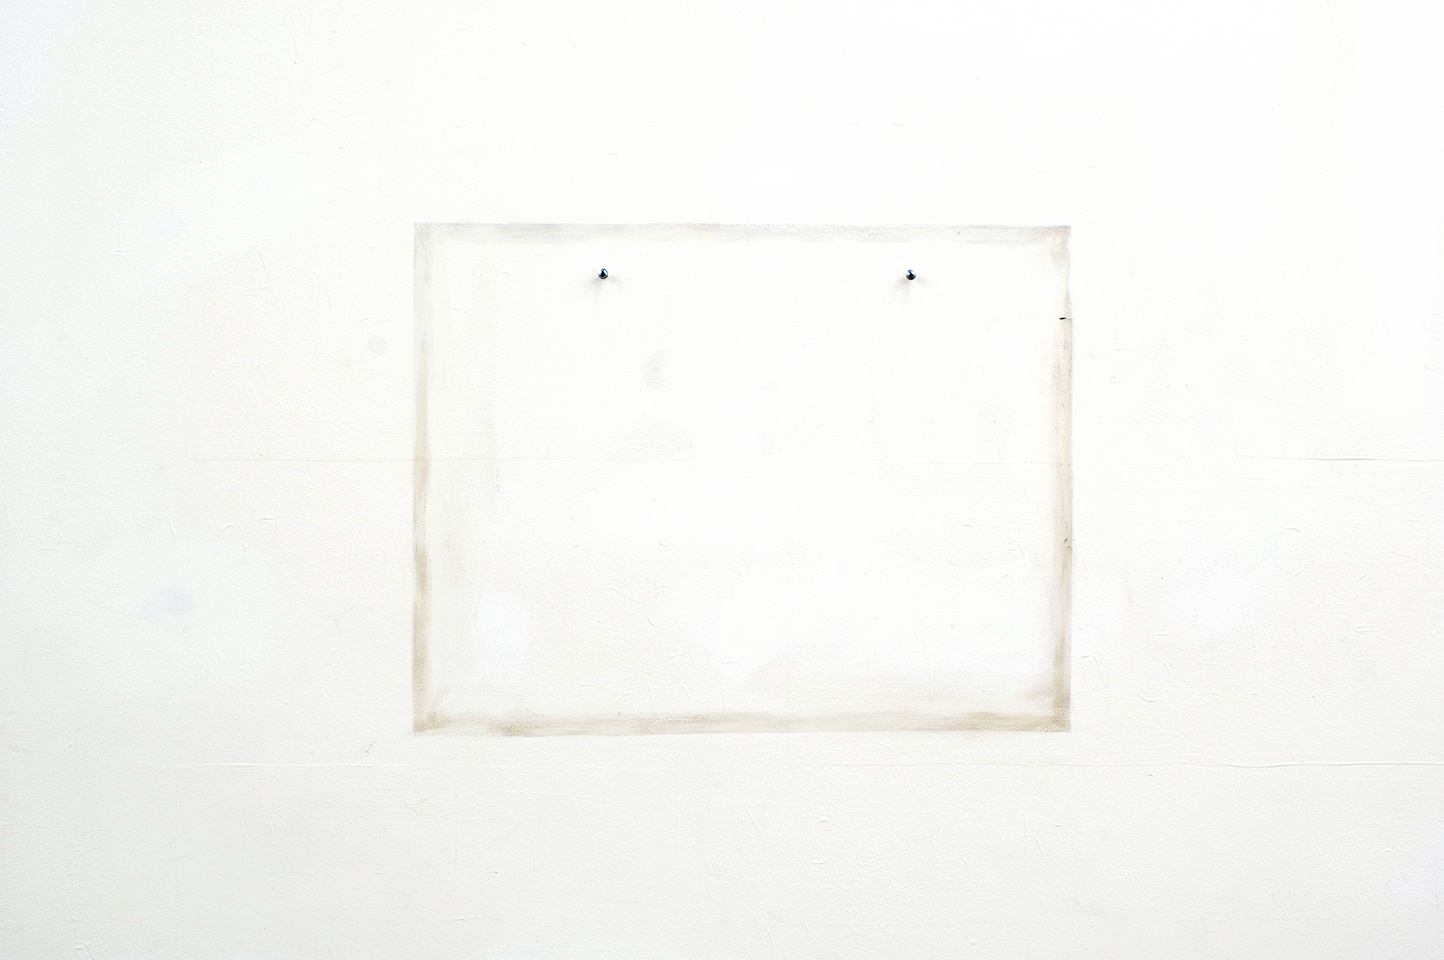 Paintings For Hotels, 2019 is a pencil drawing on a wall, recreating the effect of a painting that has been removed, leaving a rectangular trace on the wall.